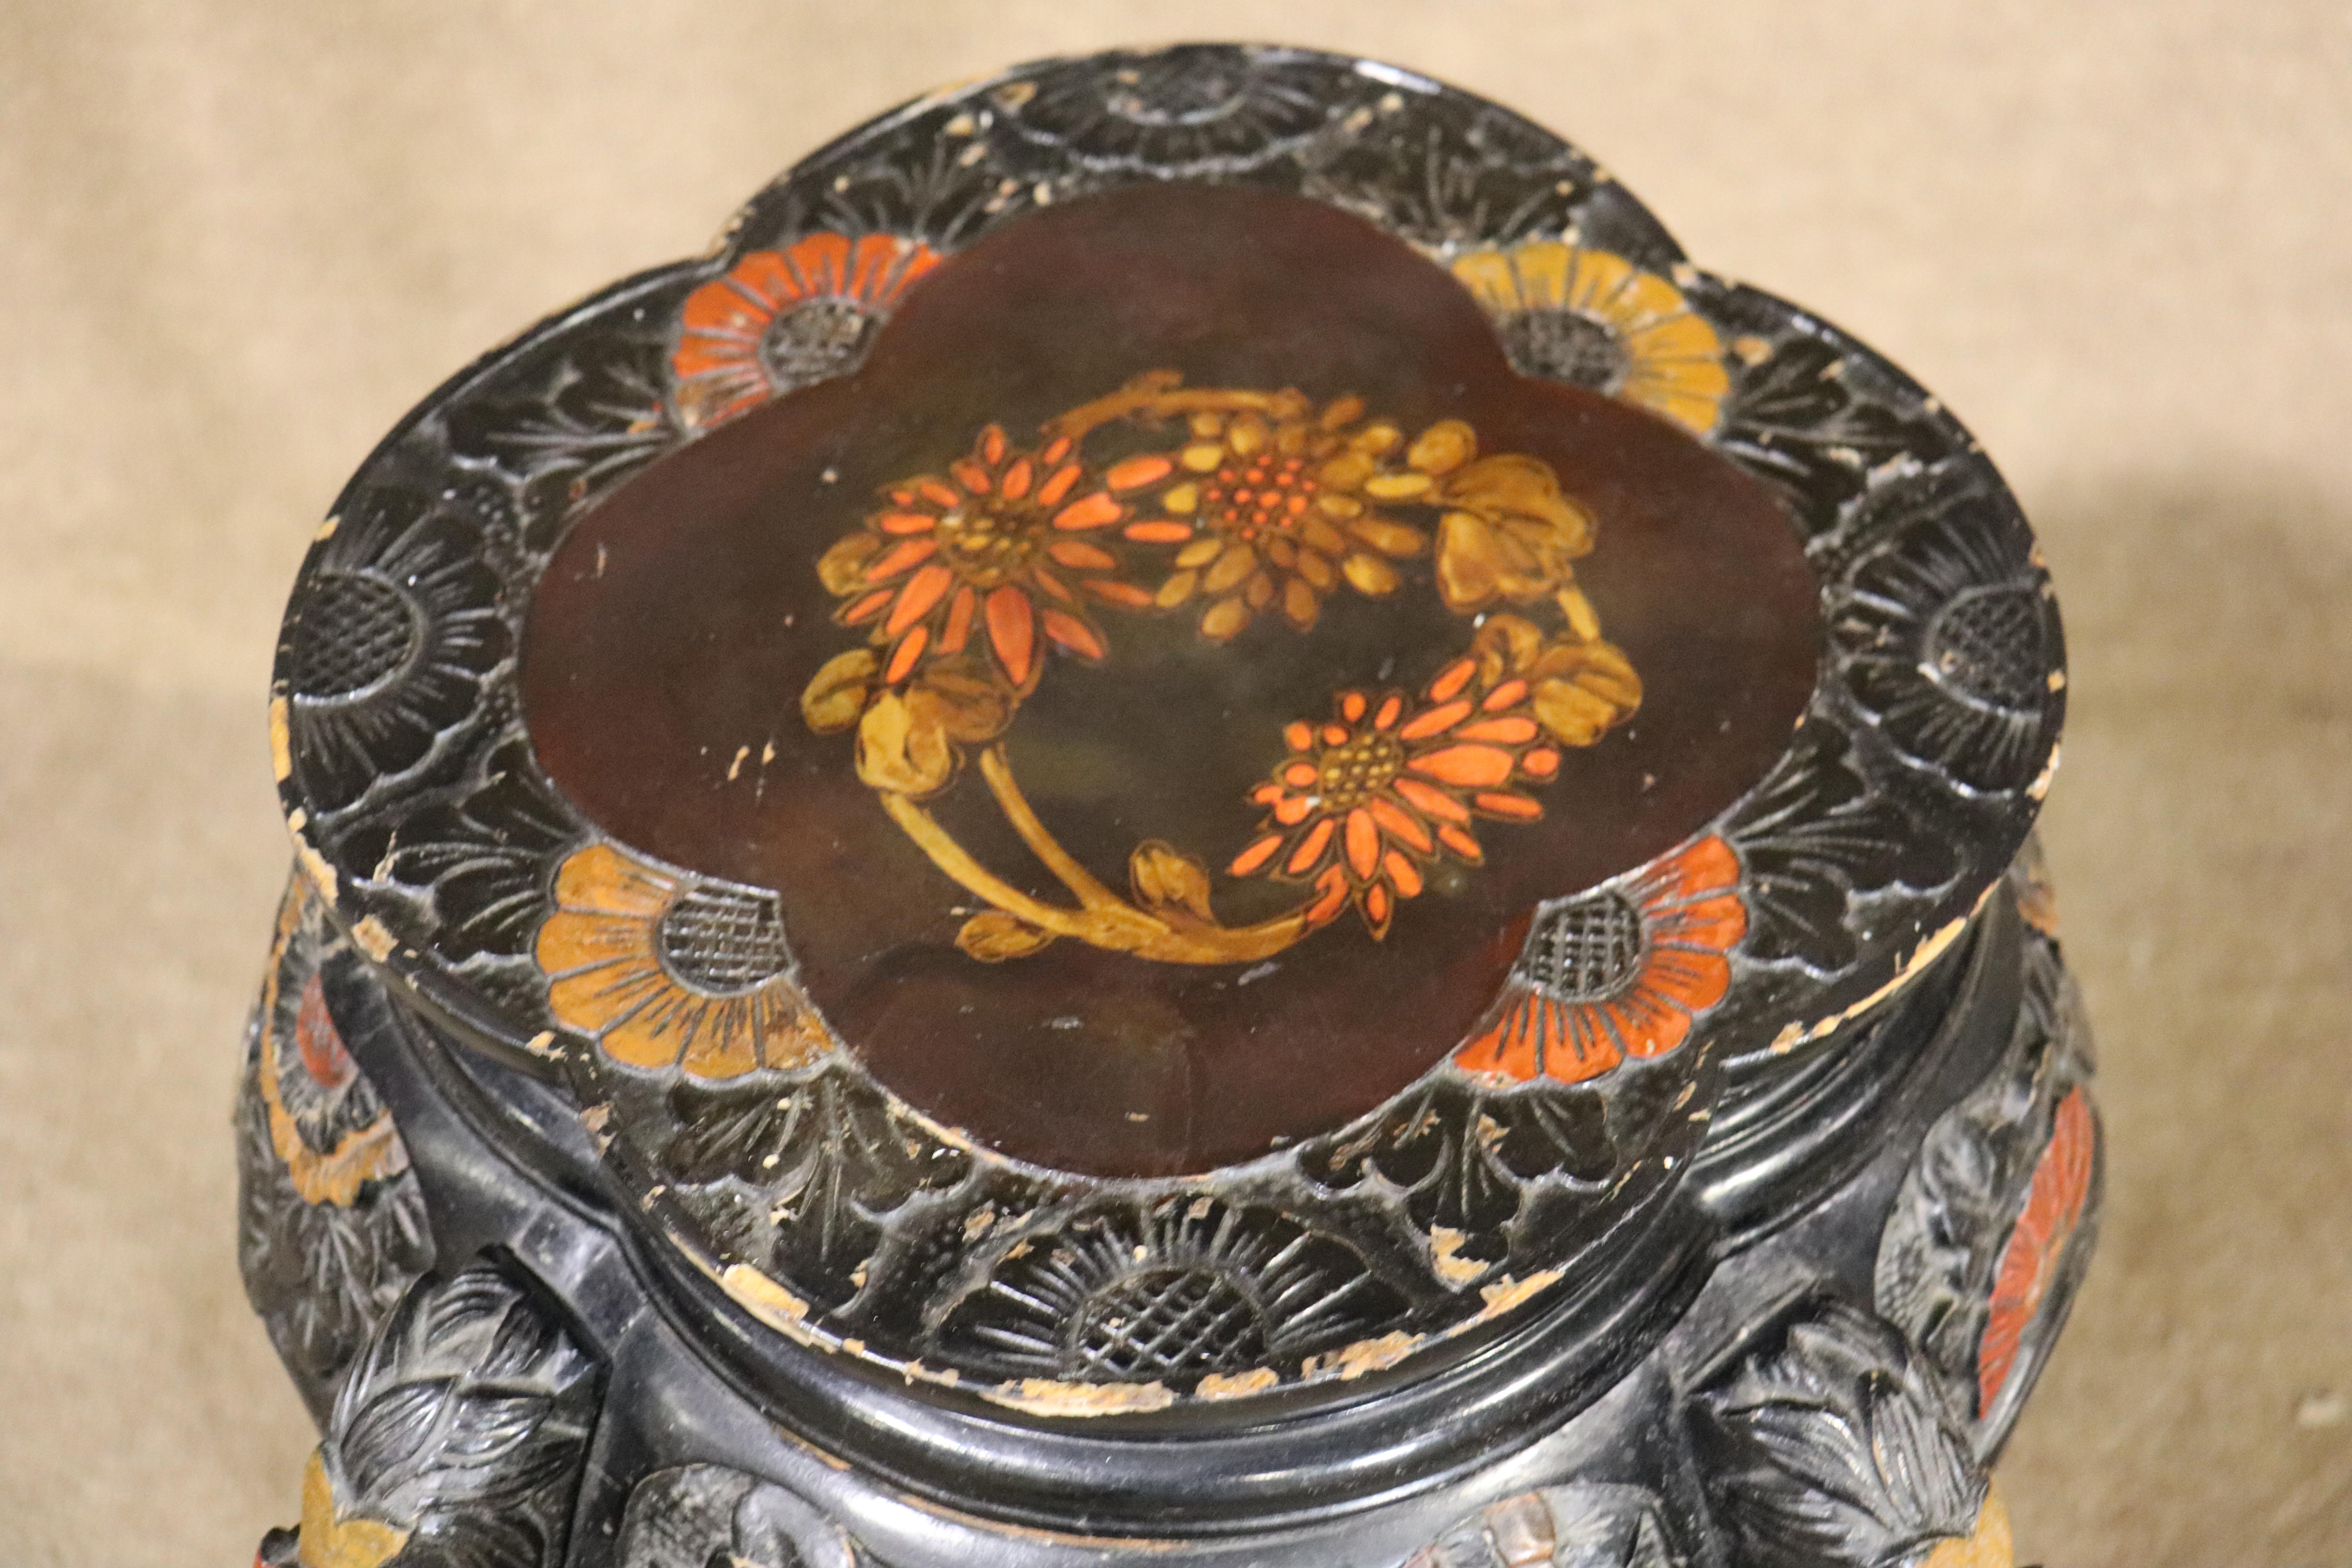 Ebonized pedestal with Japanese decorative carvings. Beautiful home decor.
Please confirm location NY or NJ